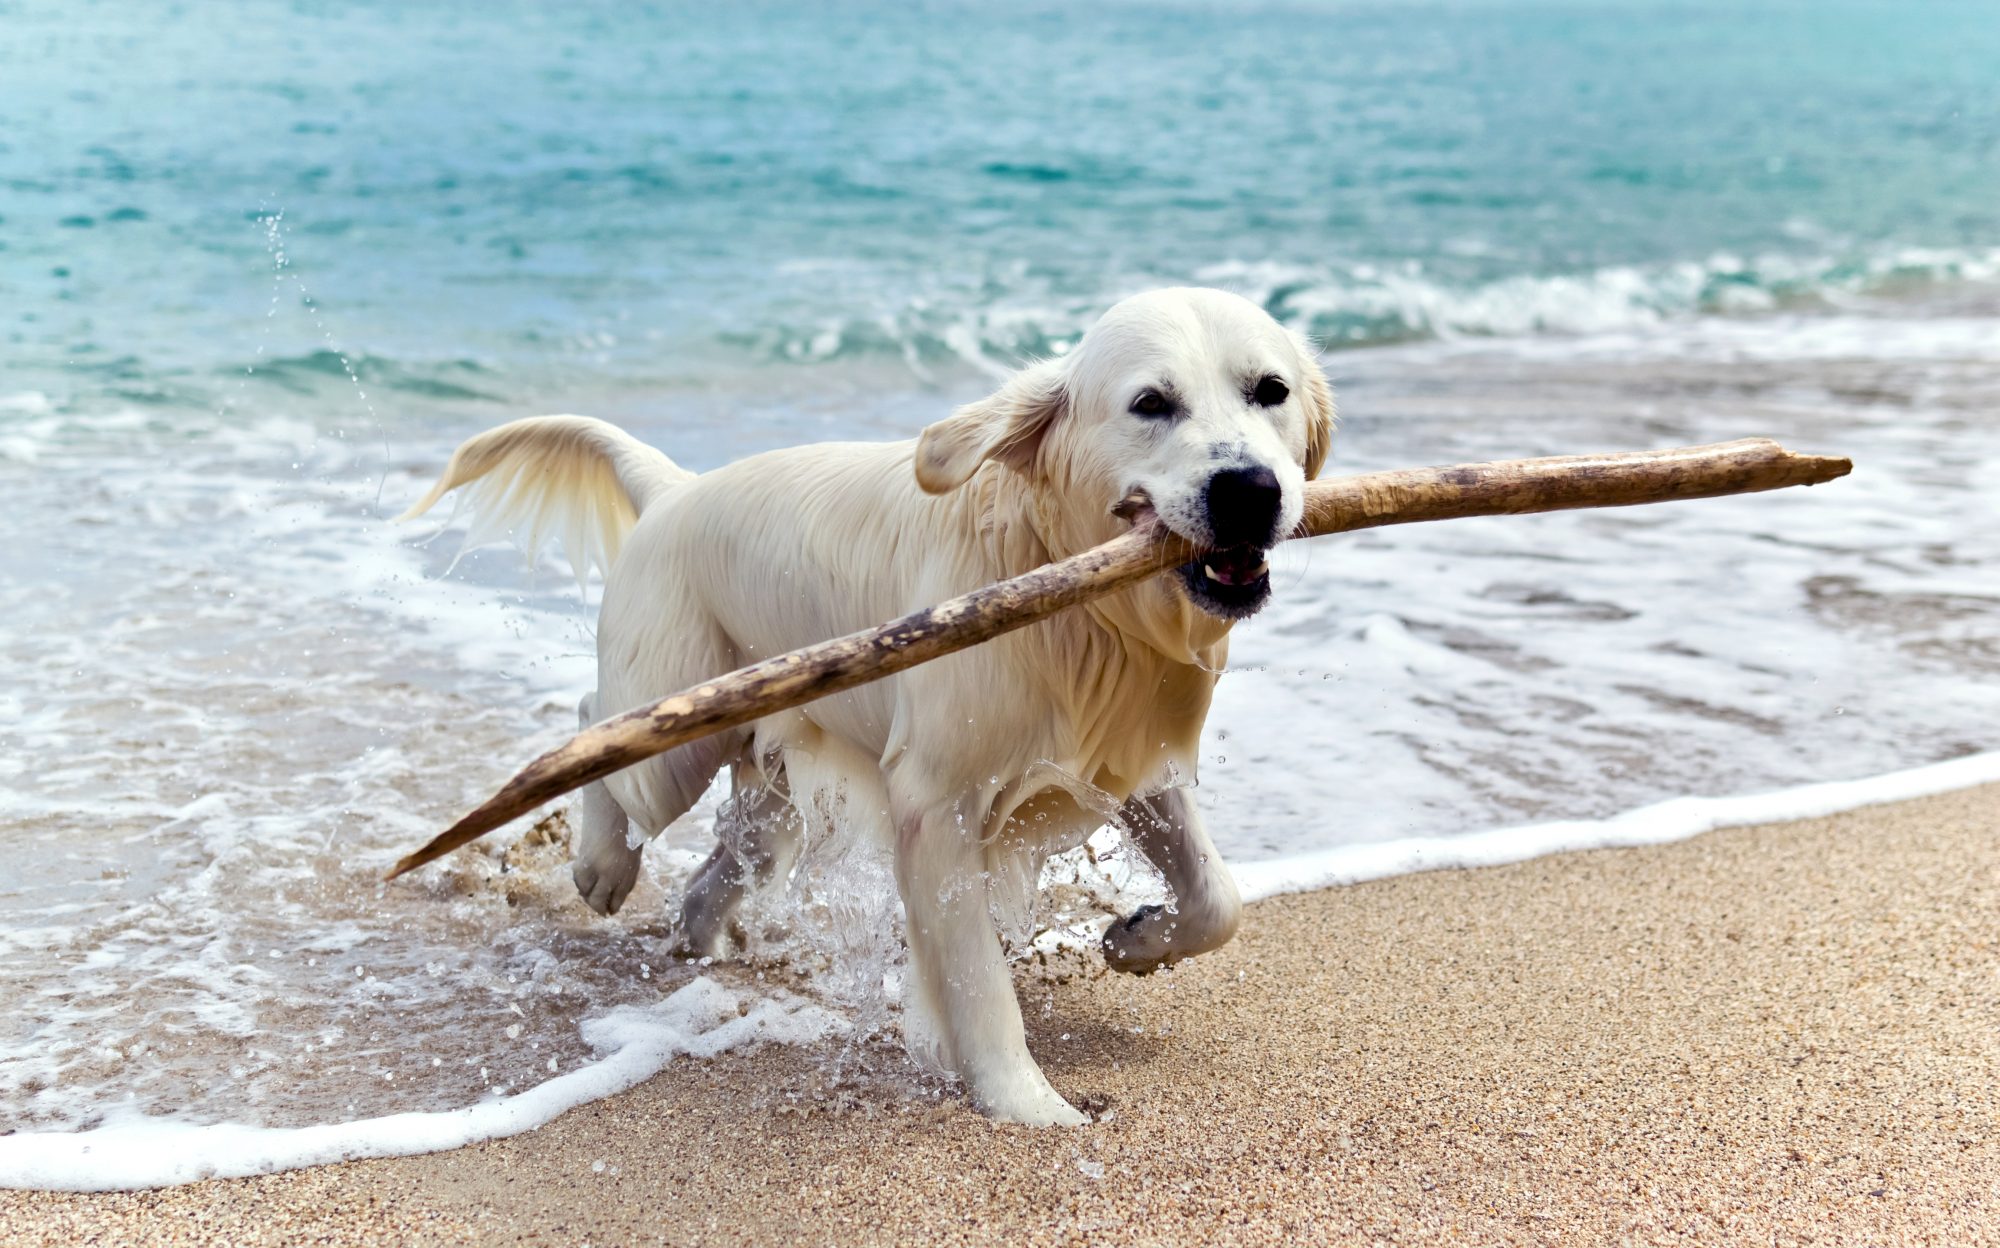 Labrador retriever on the beach with a stick in its mouth